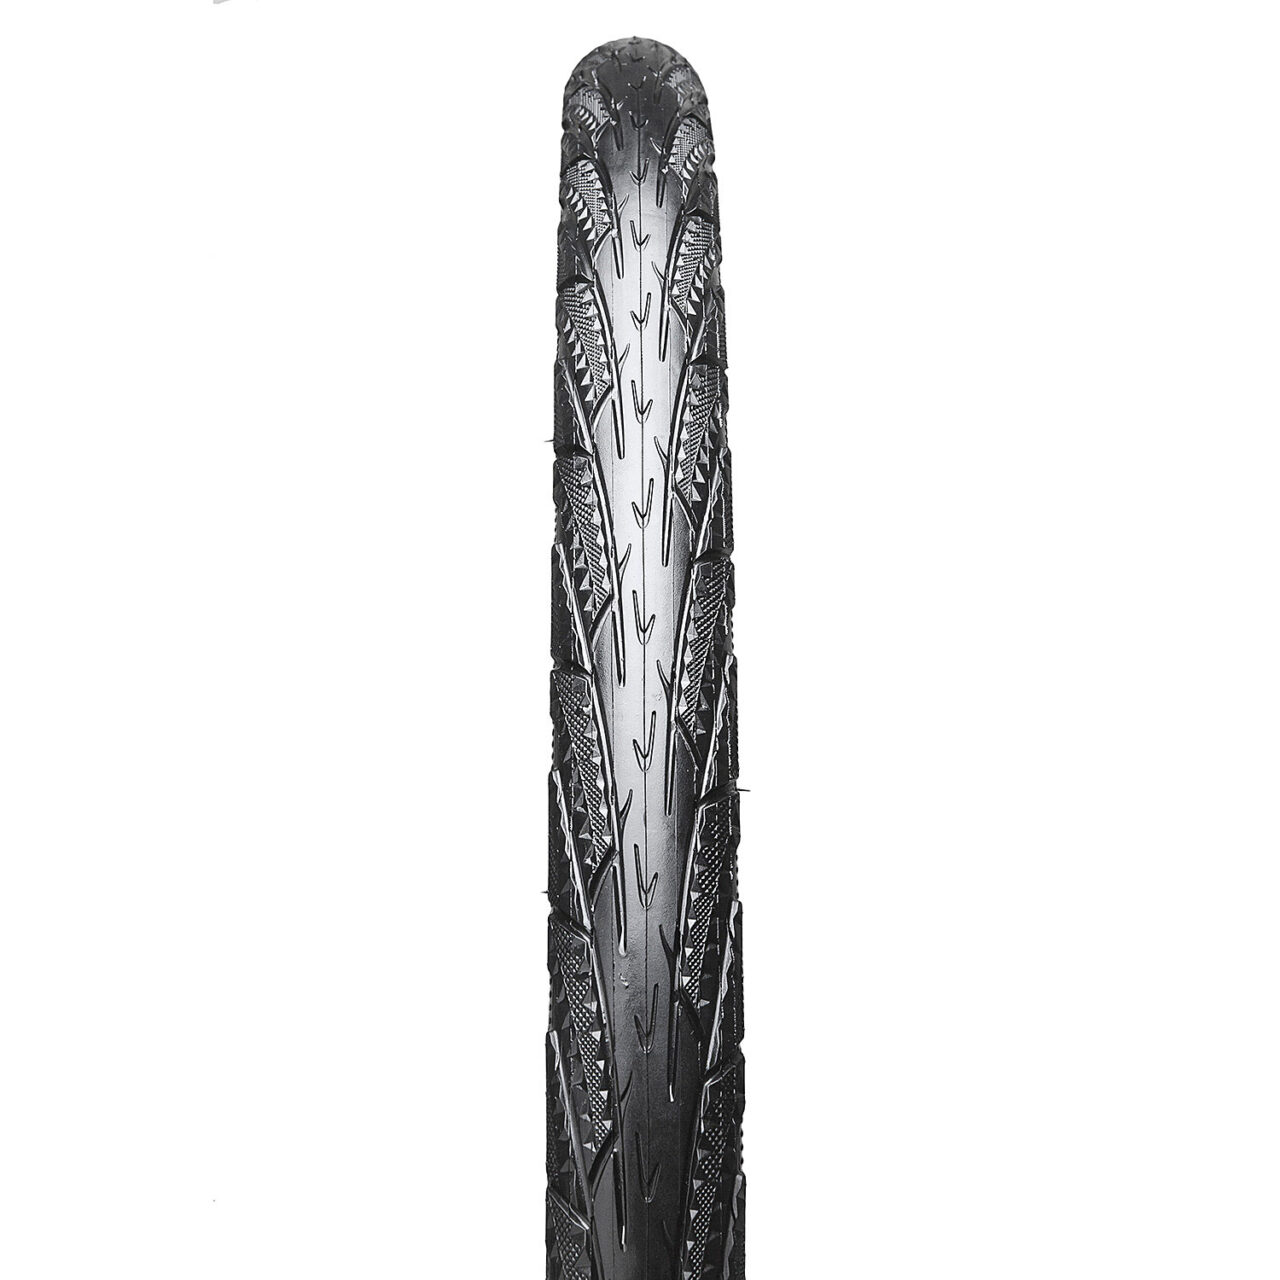 Maxxis Overdrive II bicycle tire tread